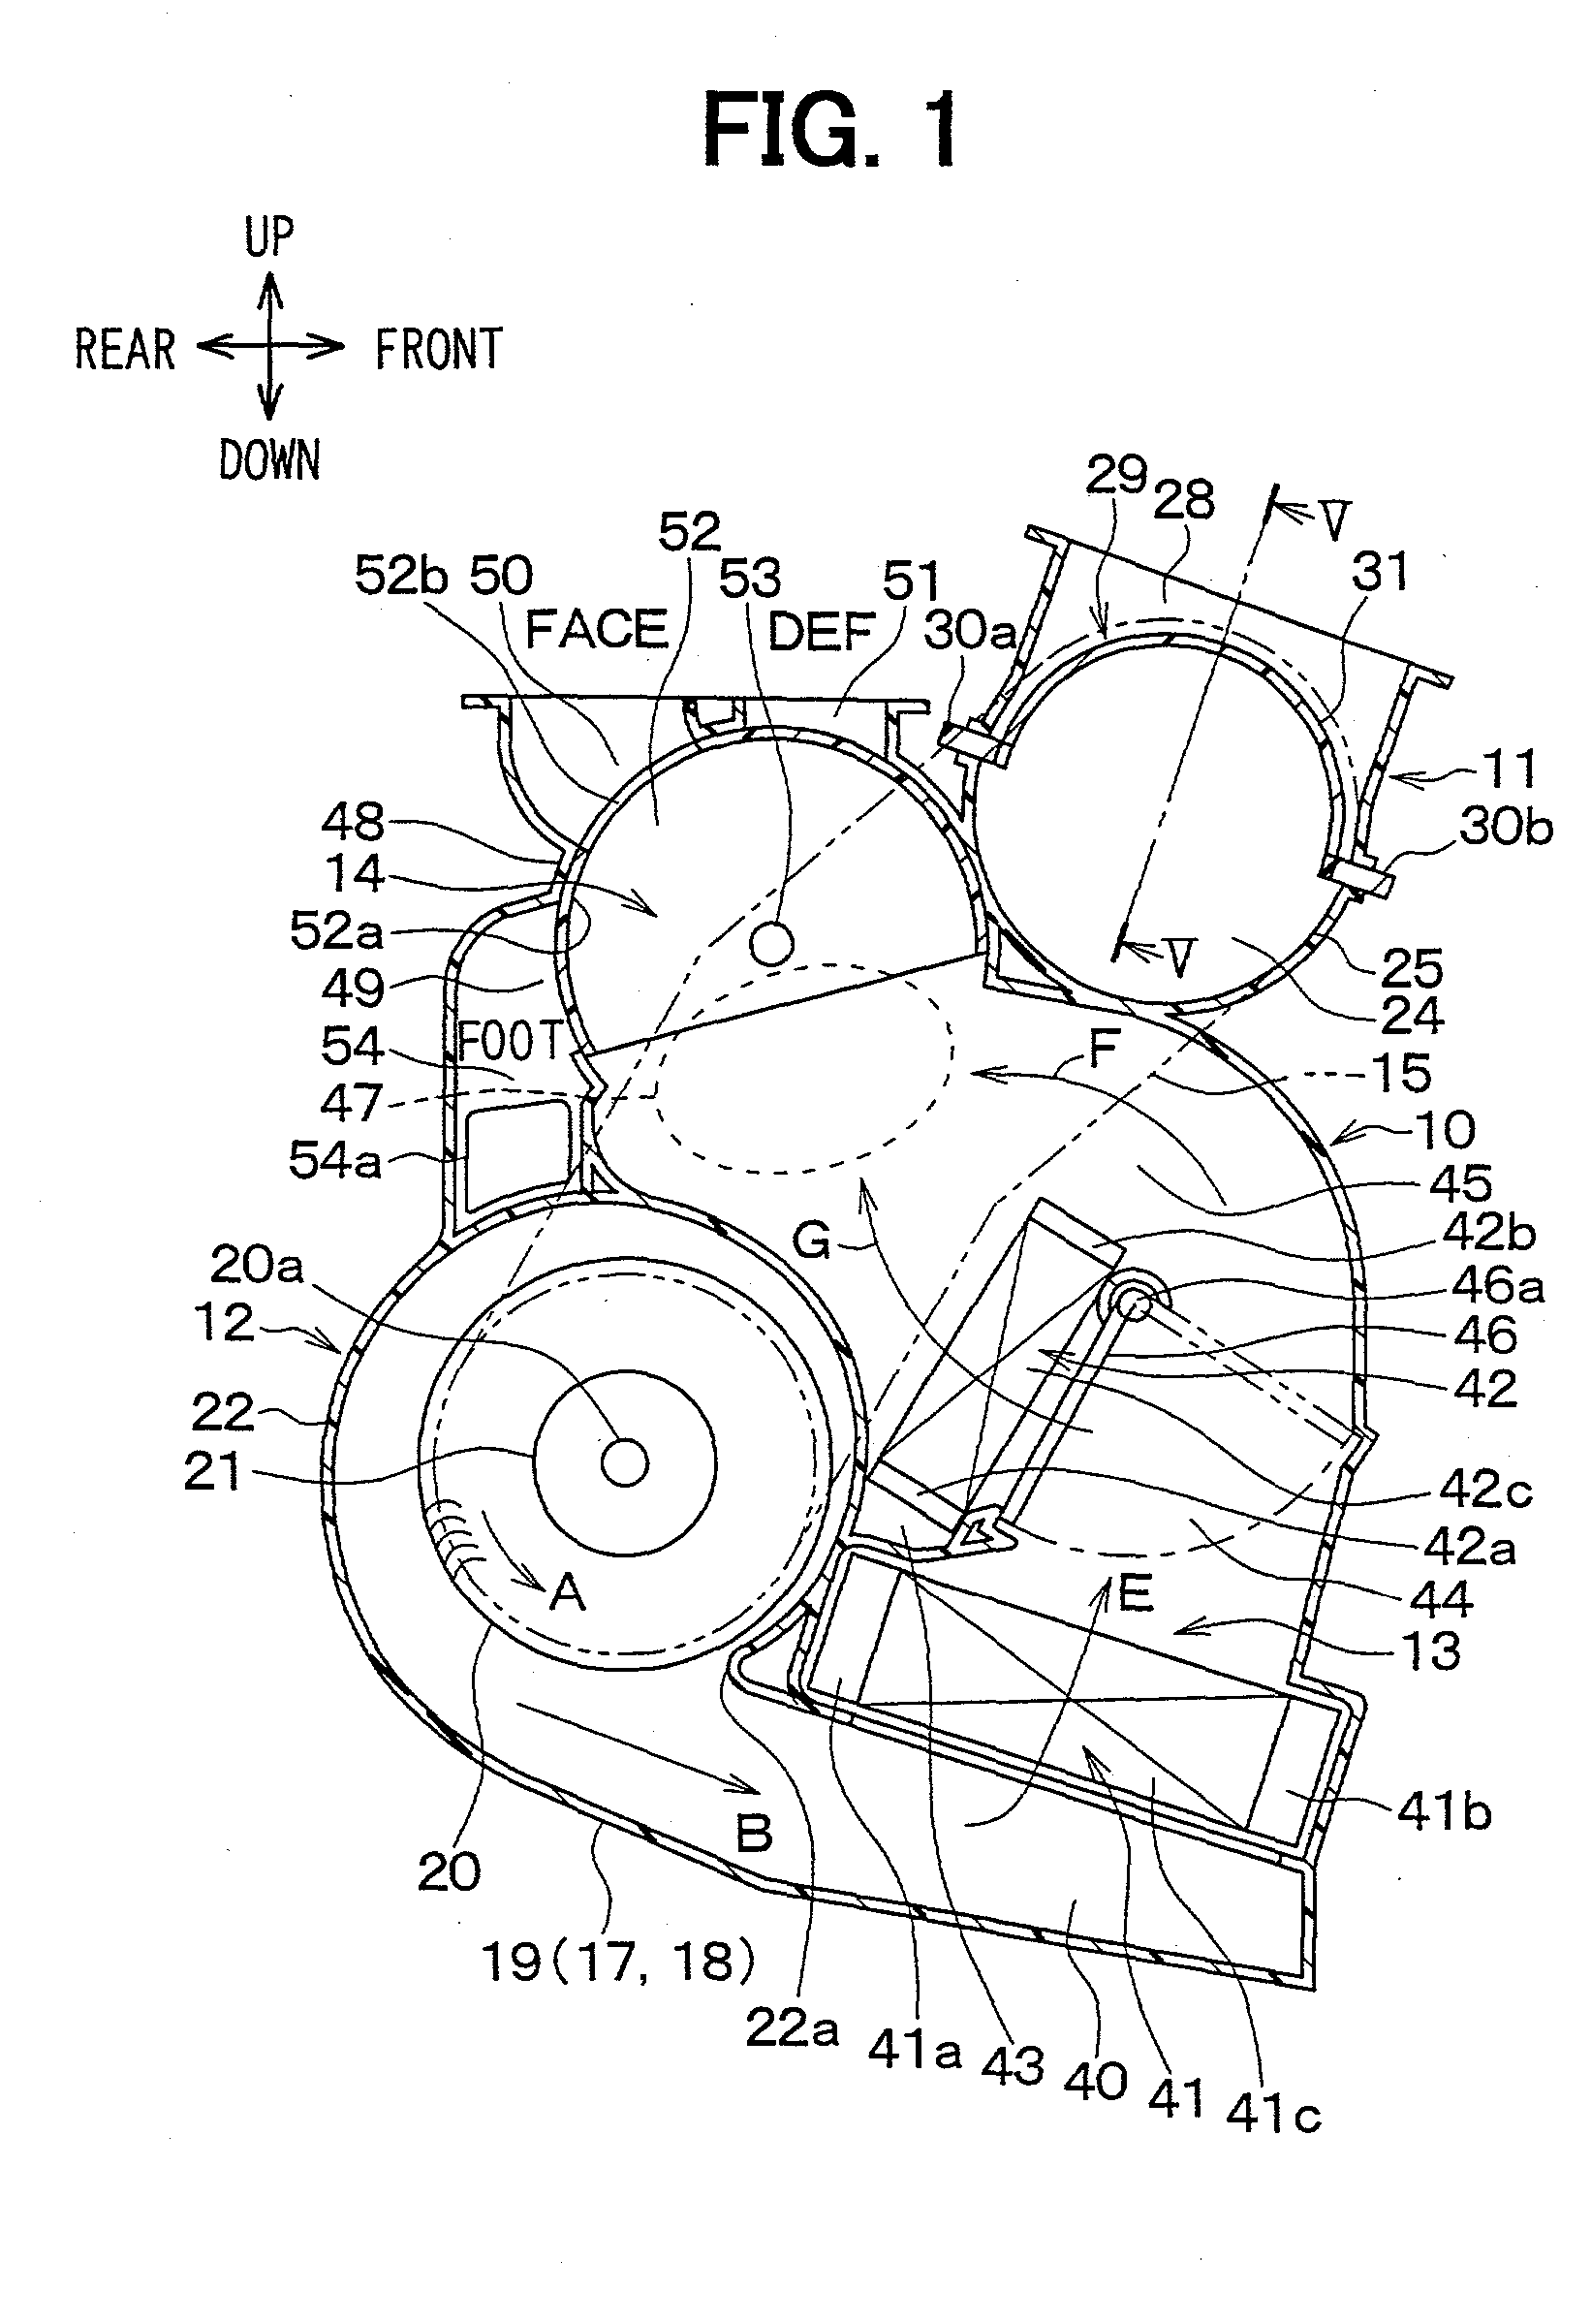 Air conditioner for vehicles with right steering wheel and left steering wheel